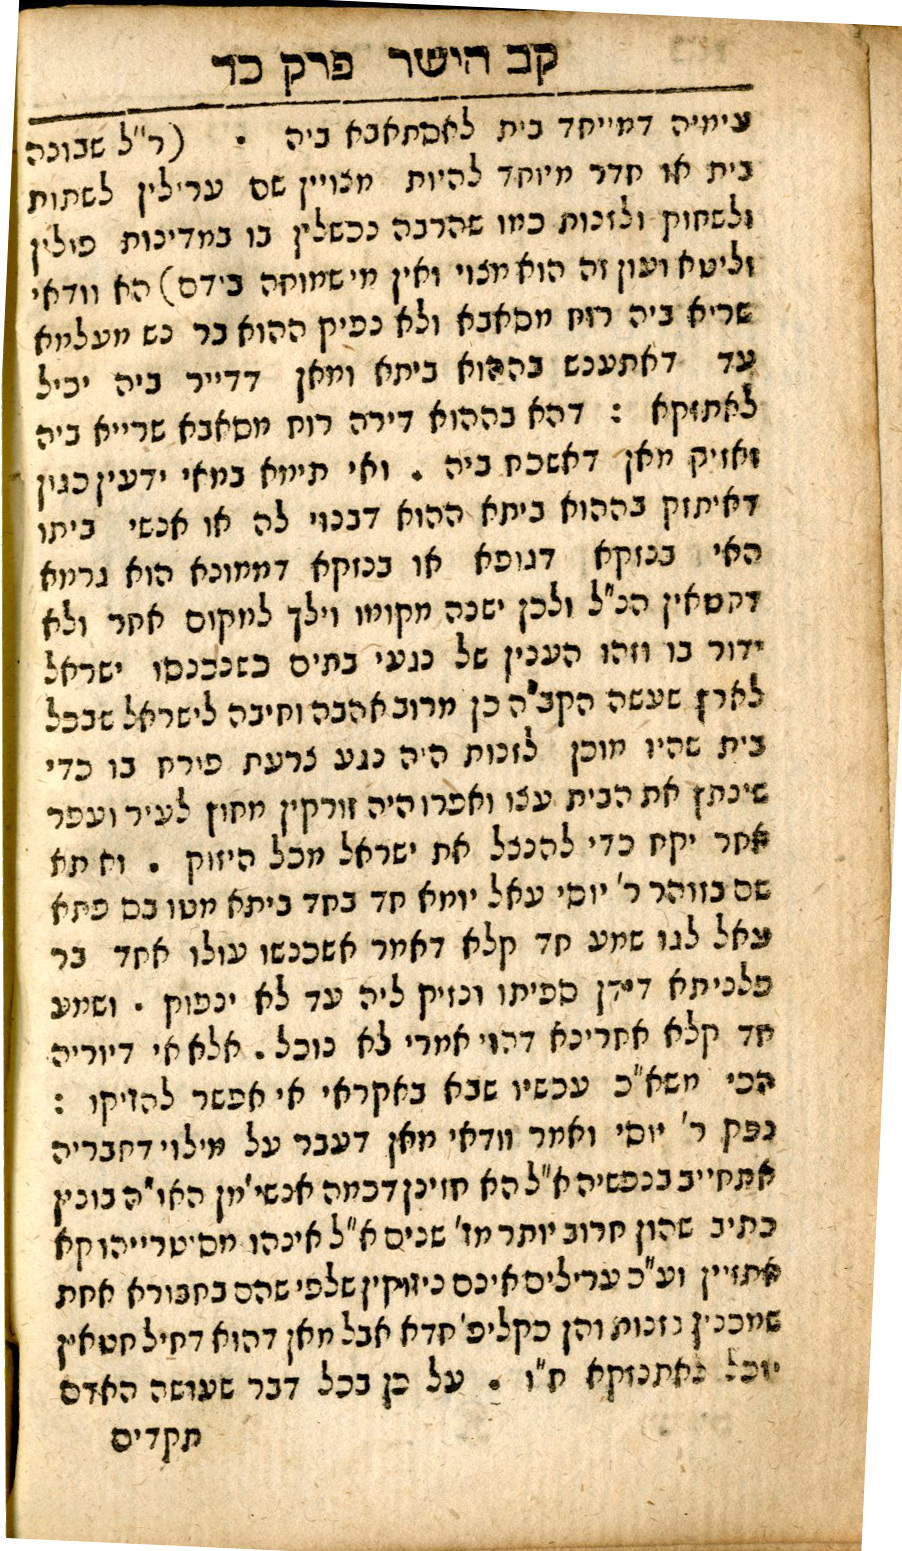 Page on tavern-keeping, written in Hebrew